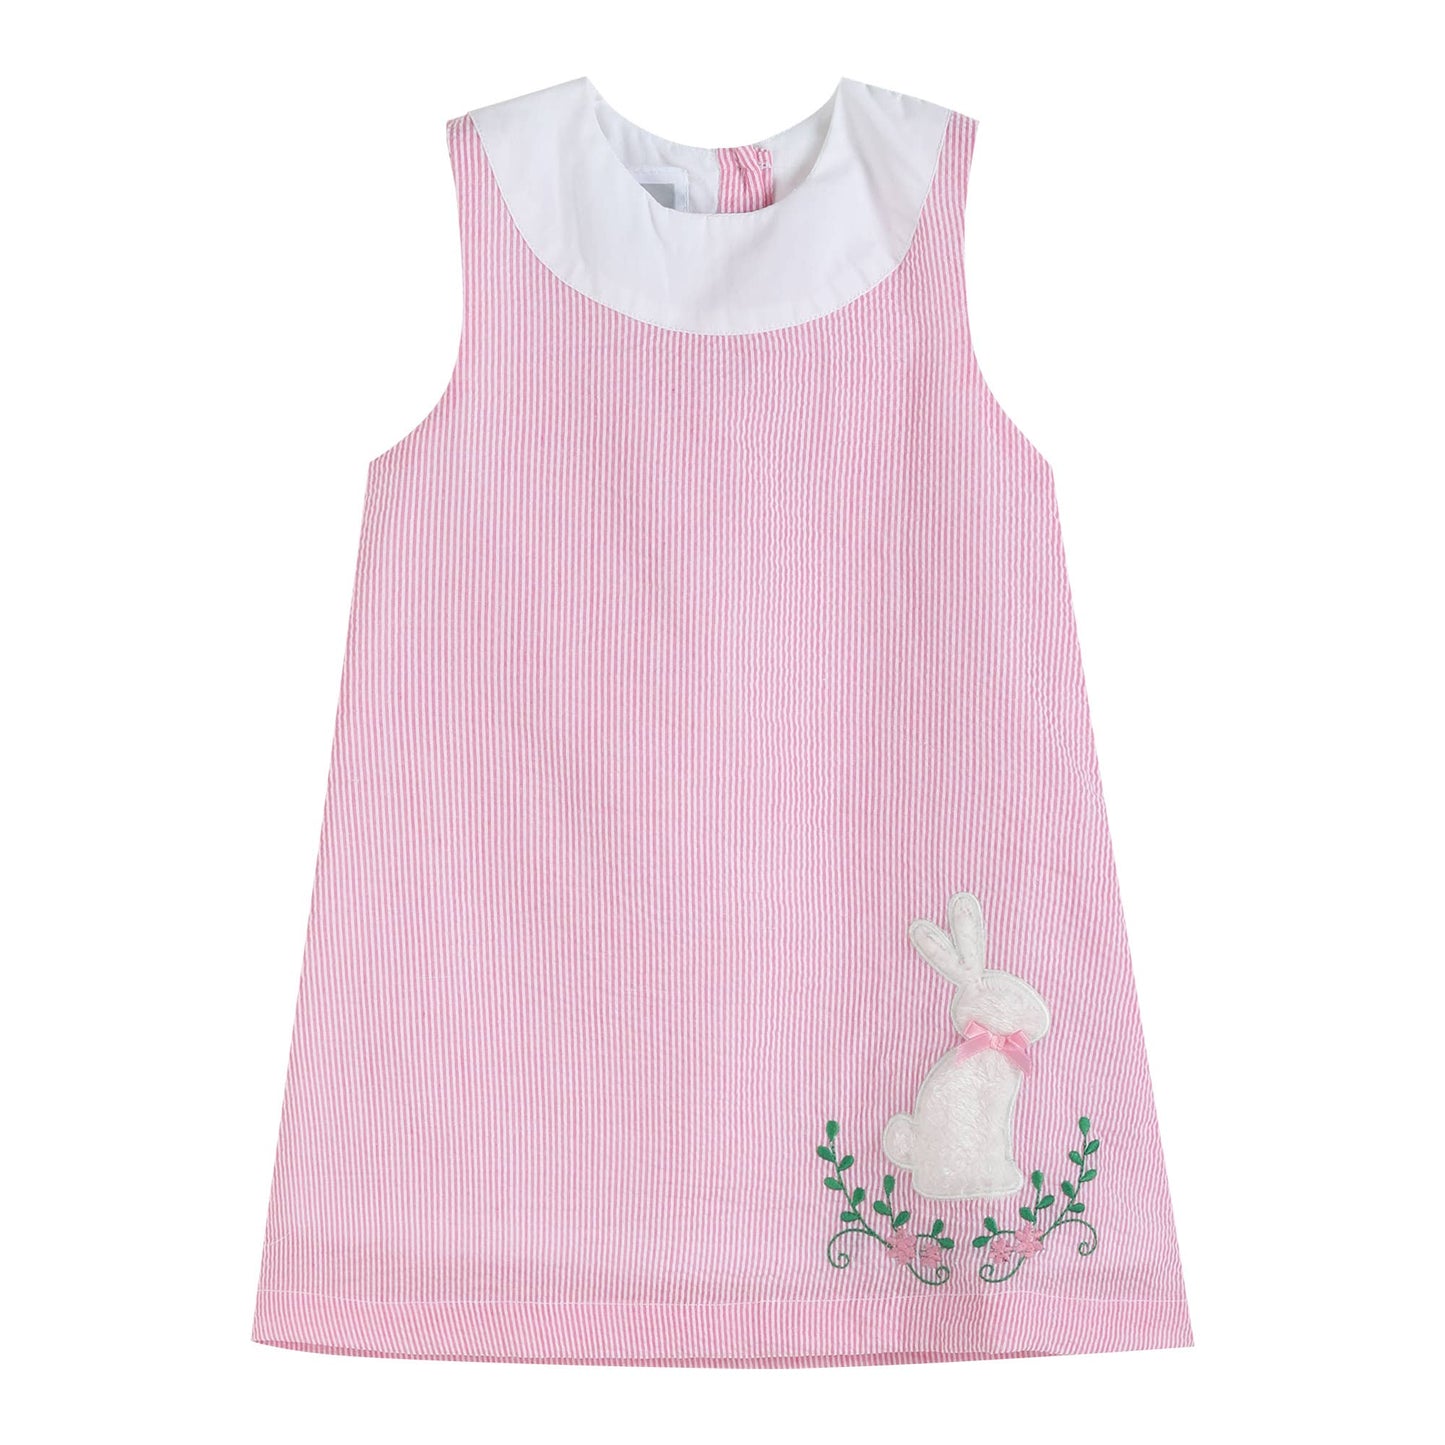 Pink Fuzzy Easter Bunny Swing Dress